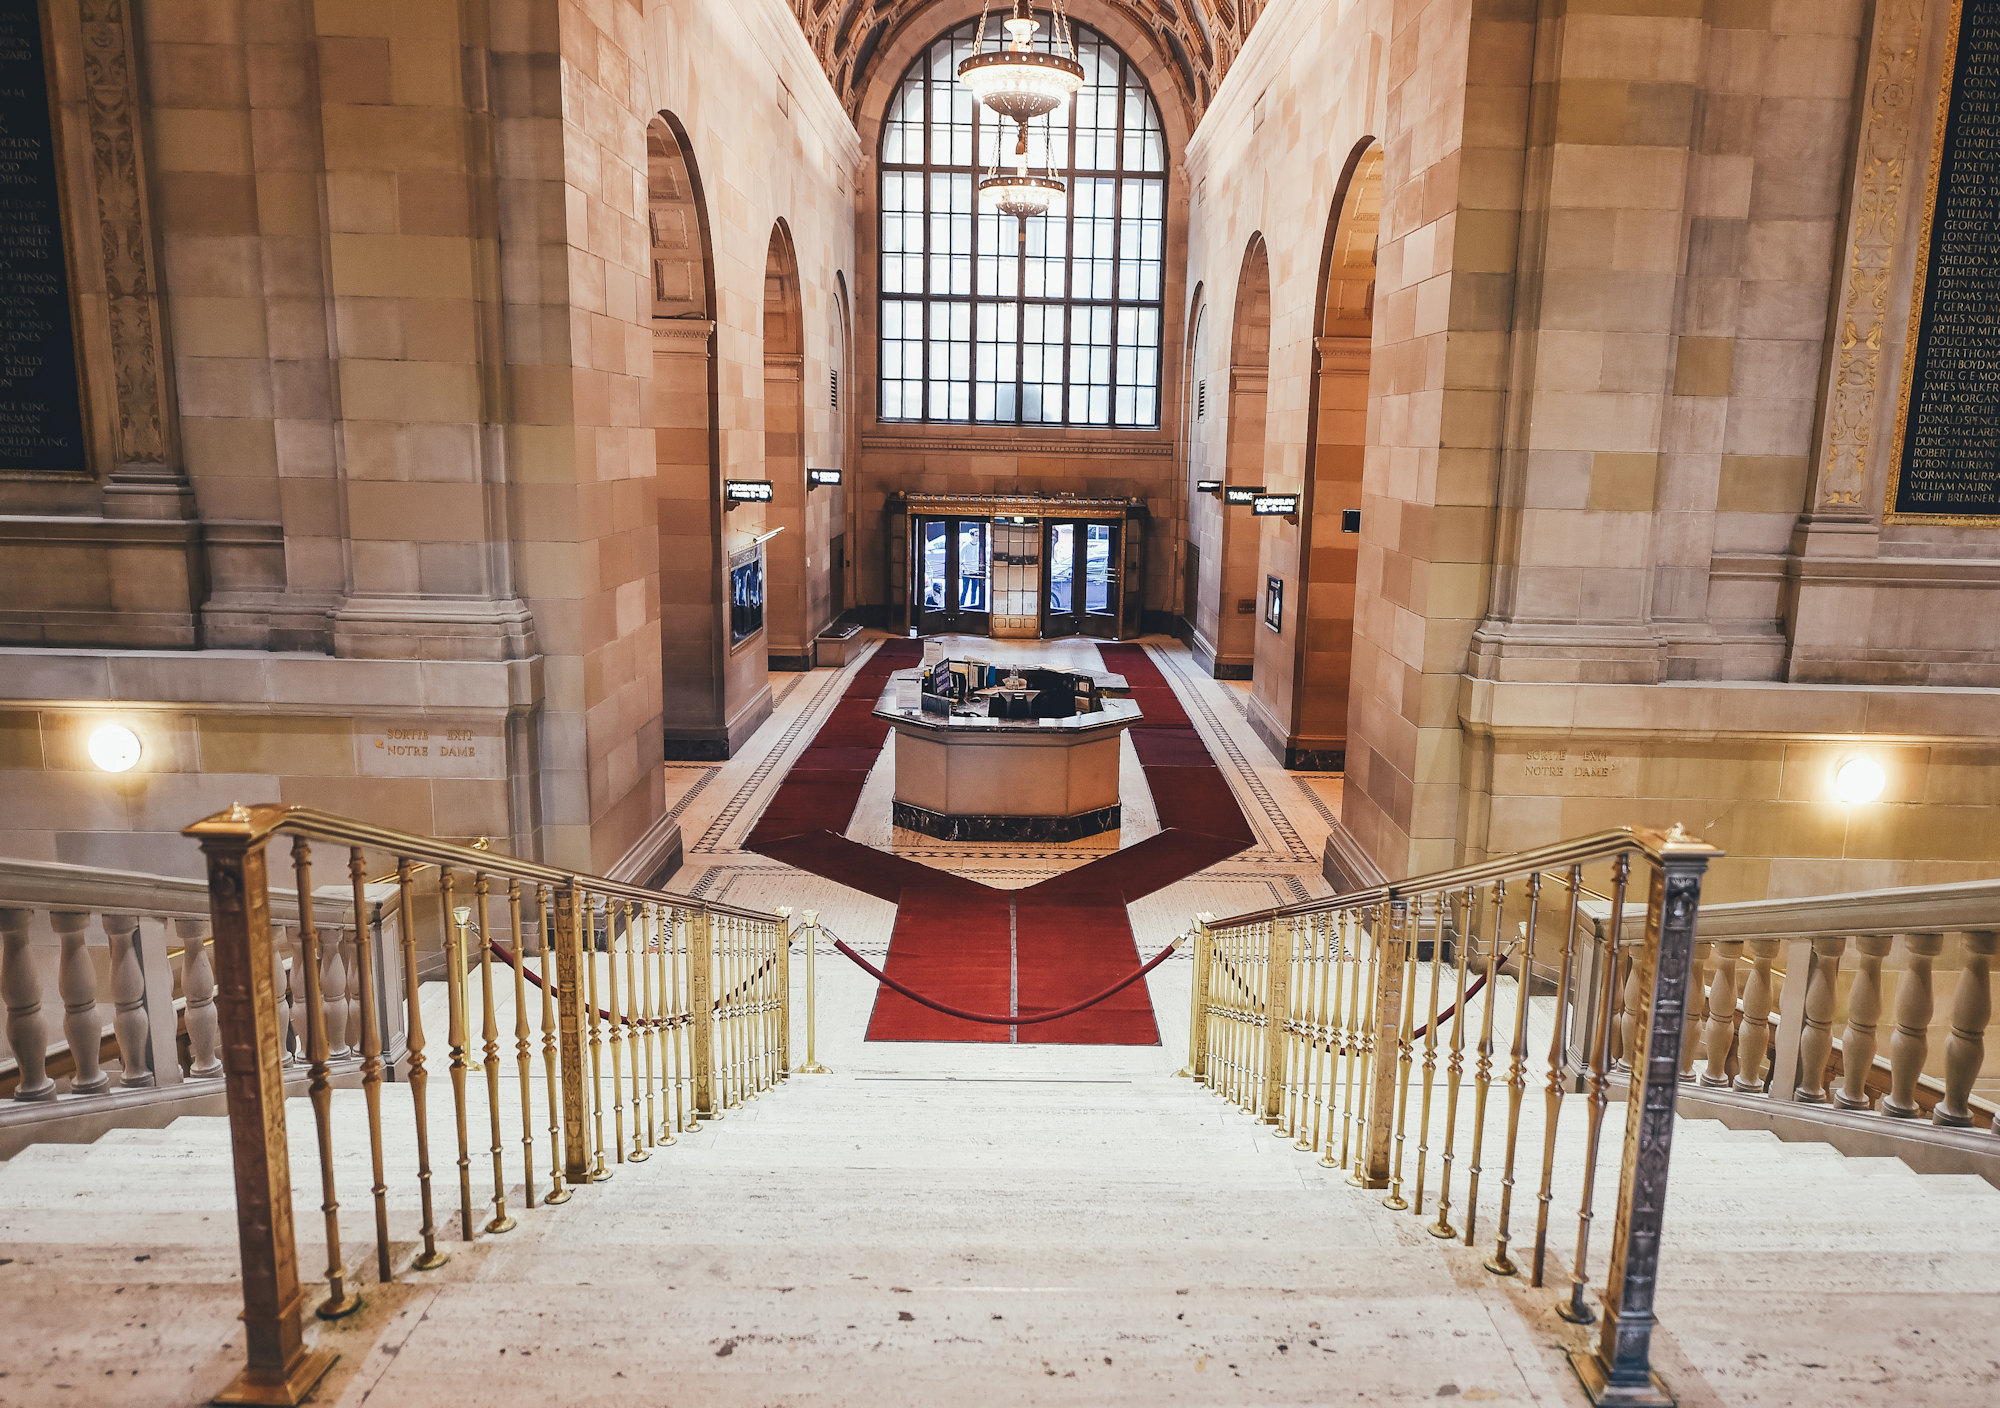 View down the stairs of a fancy building, ending in a velvet rope